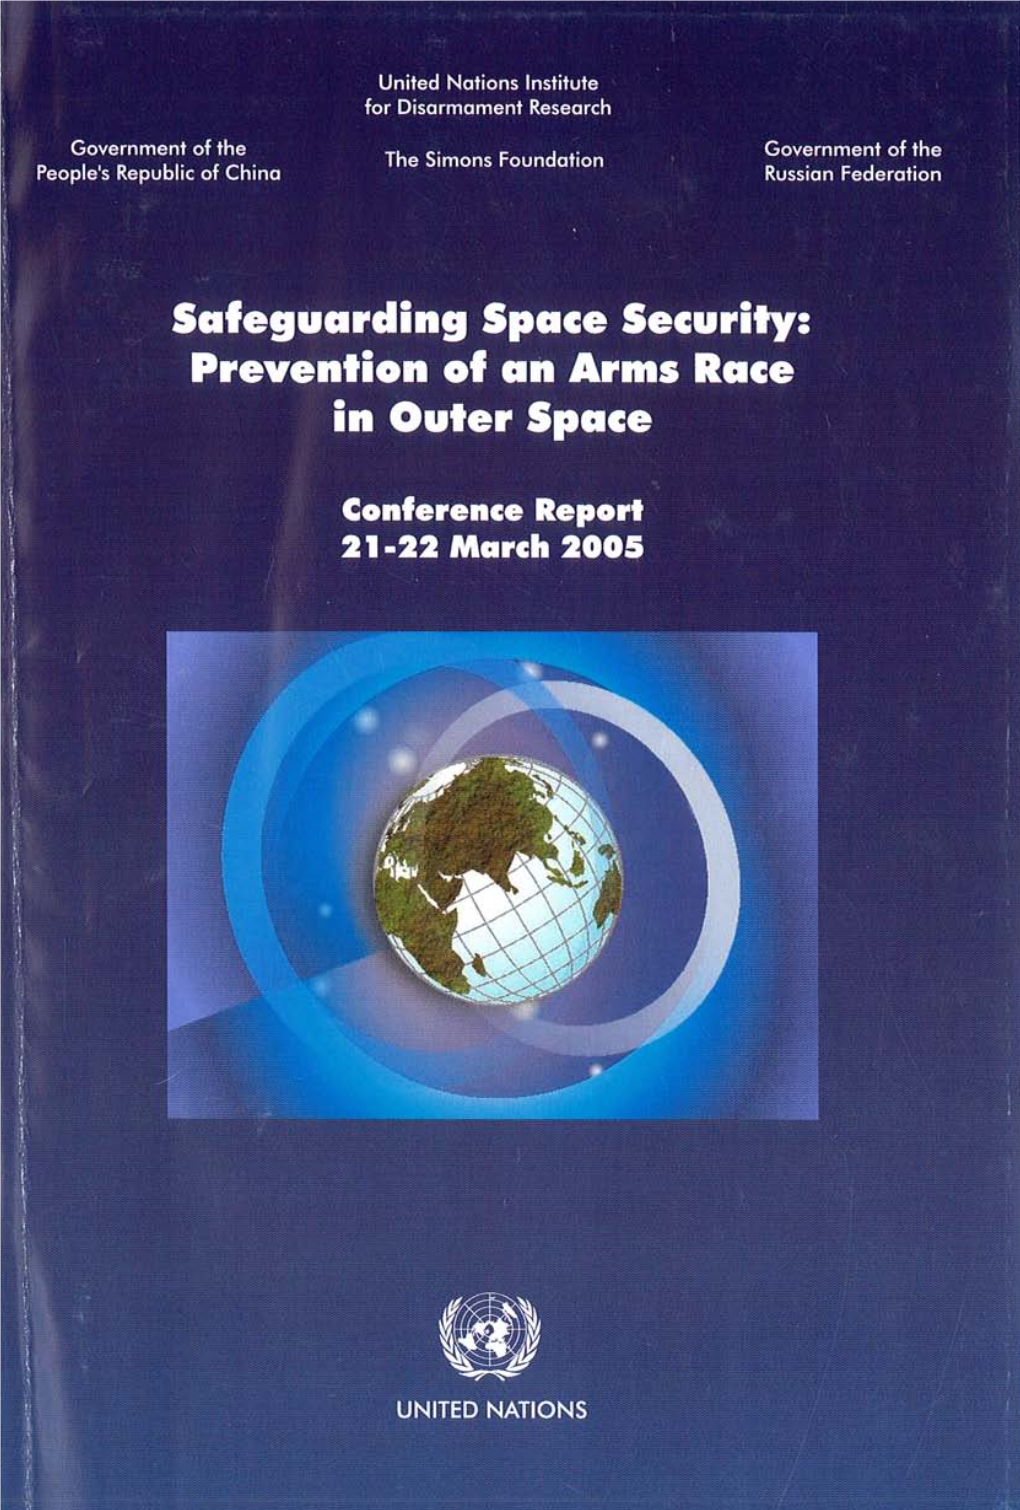 Prevention of an Arms Race in Outer Space